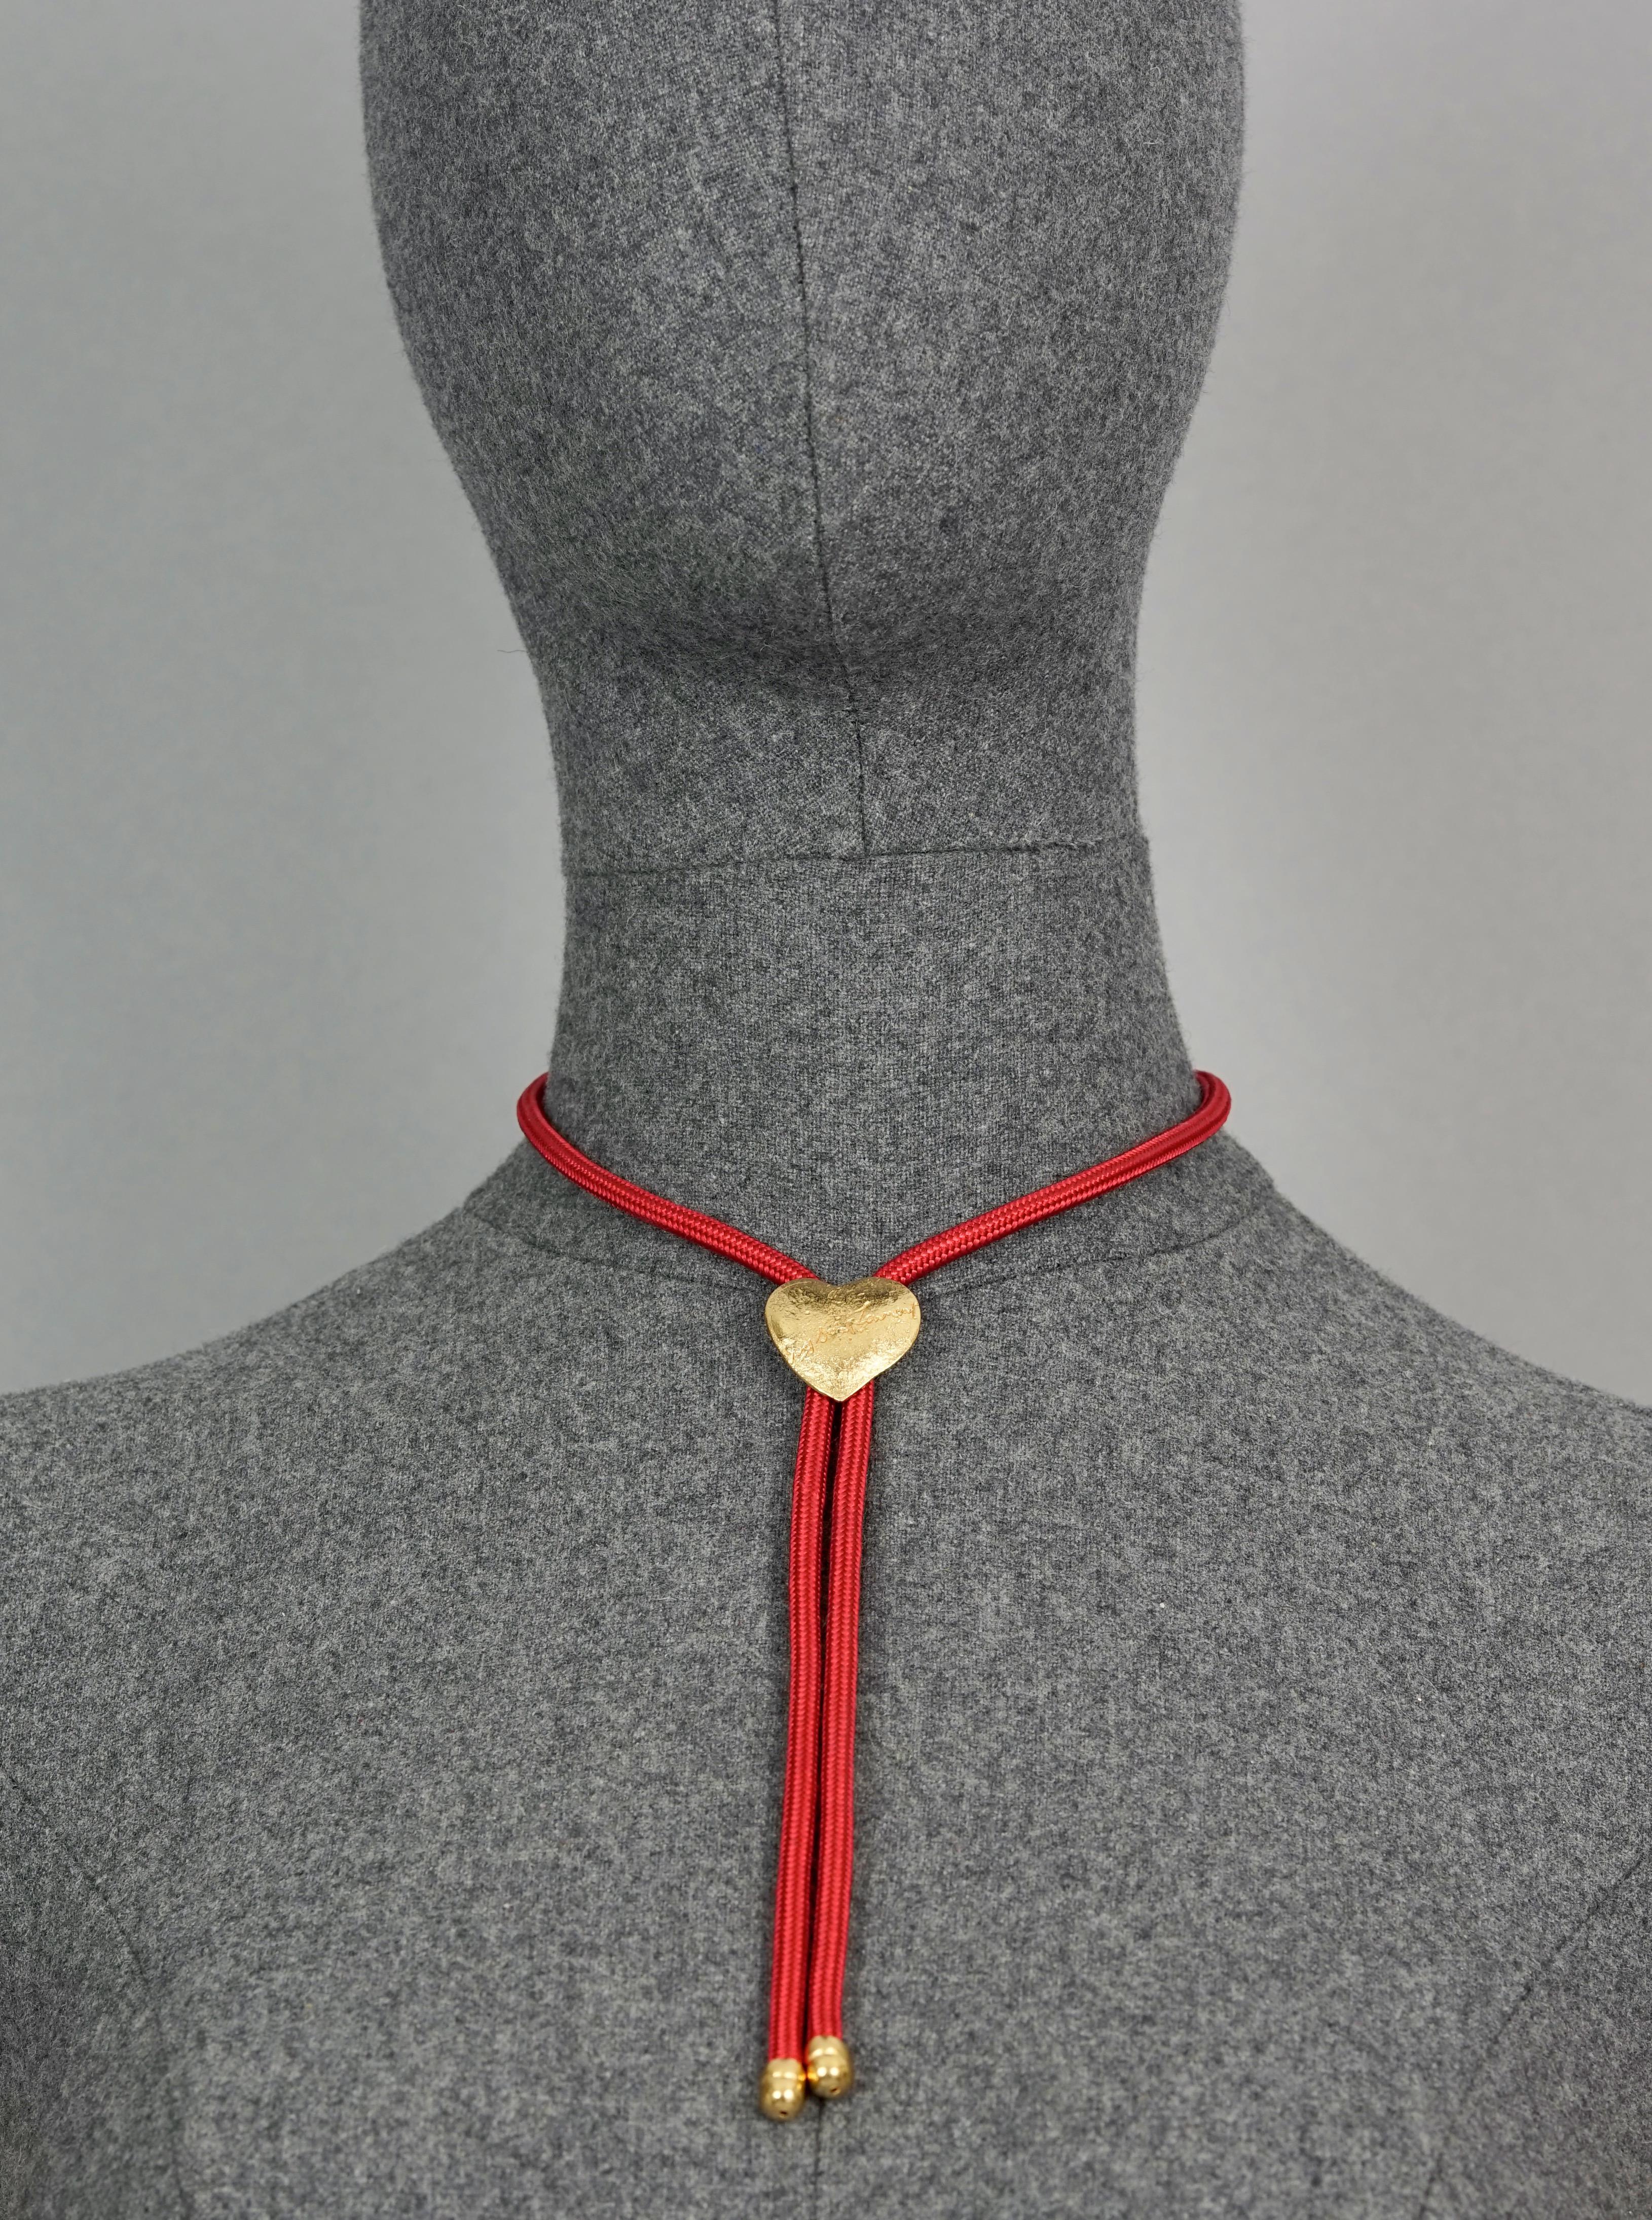 Vintage YVES SAINT LAURENT Ysl Love Heart Red Lariat Rope Necklace

Measurements:
Height Heart: 0.90 inch (2.3 cm)
Width Heart: 0.98 inch (2.5 cm)
Cord: 24.80 inches (63 cm)

Features:
- 100% Authentic YVES SAINT LAURENT.
- Heart pendant necklace